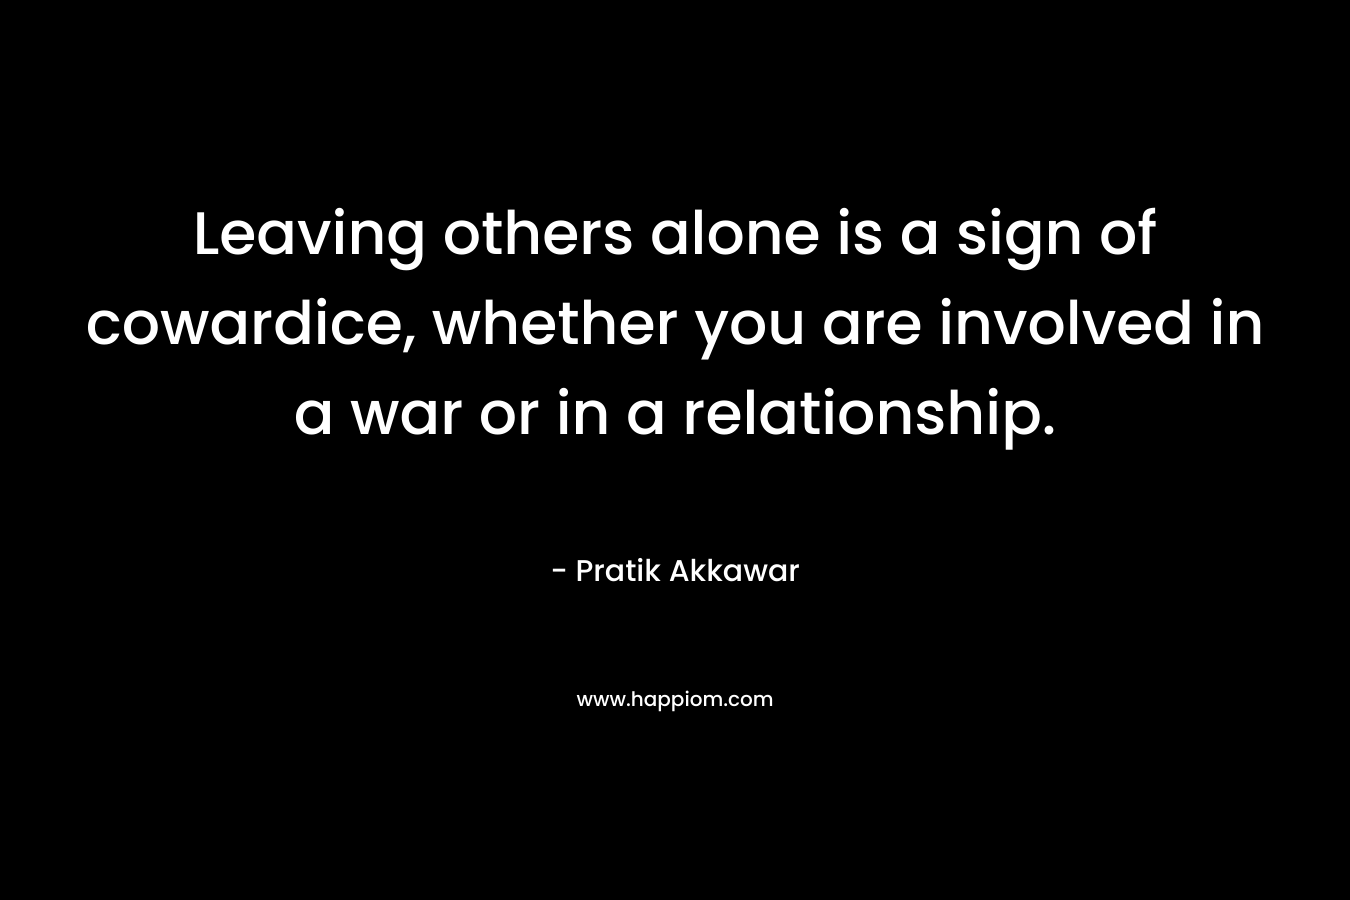 Leaving others alone is a sign of cowardice, whether you are involved in a war or in a relationship.